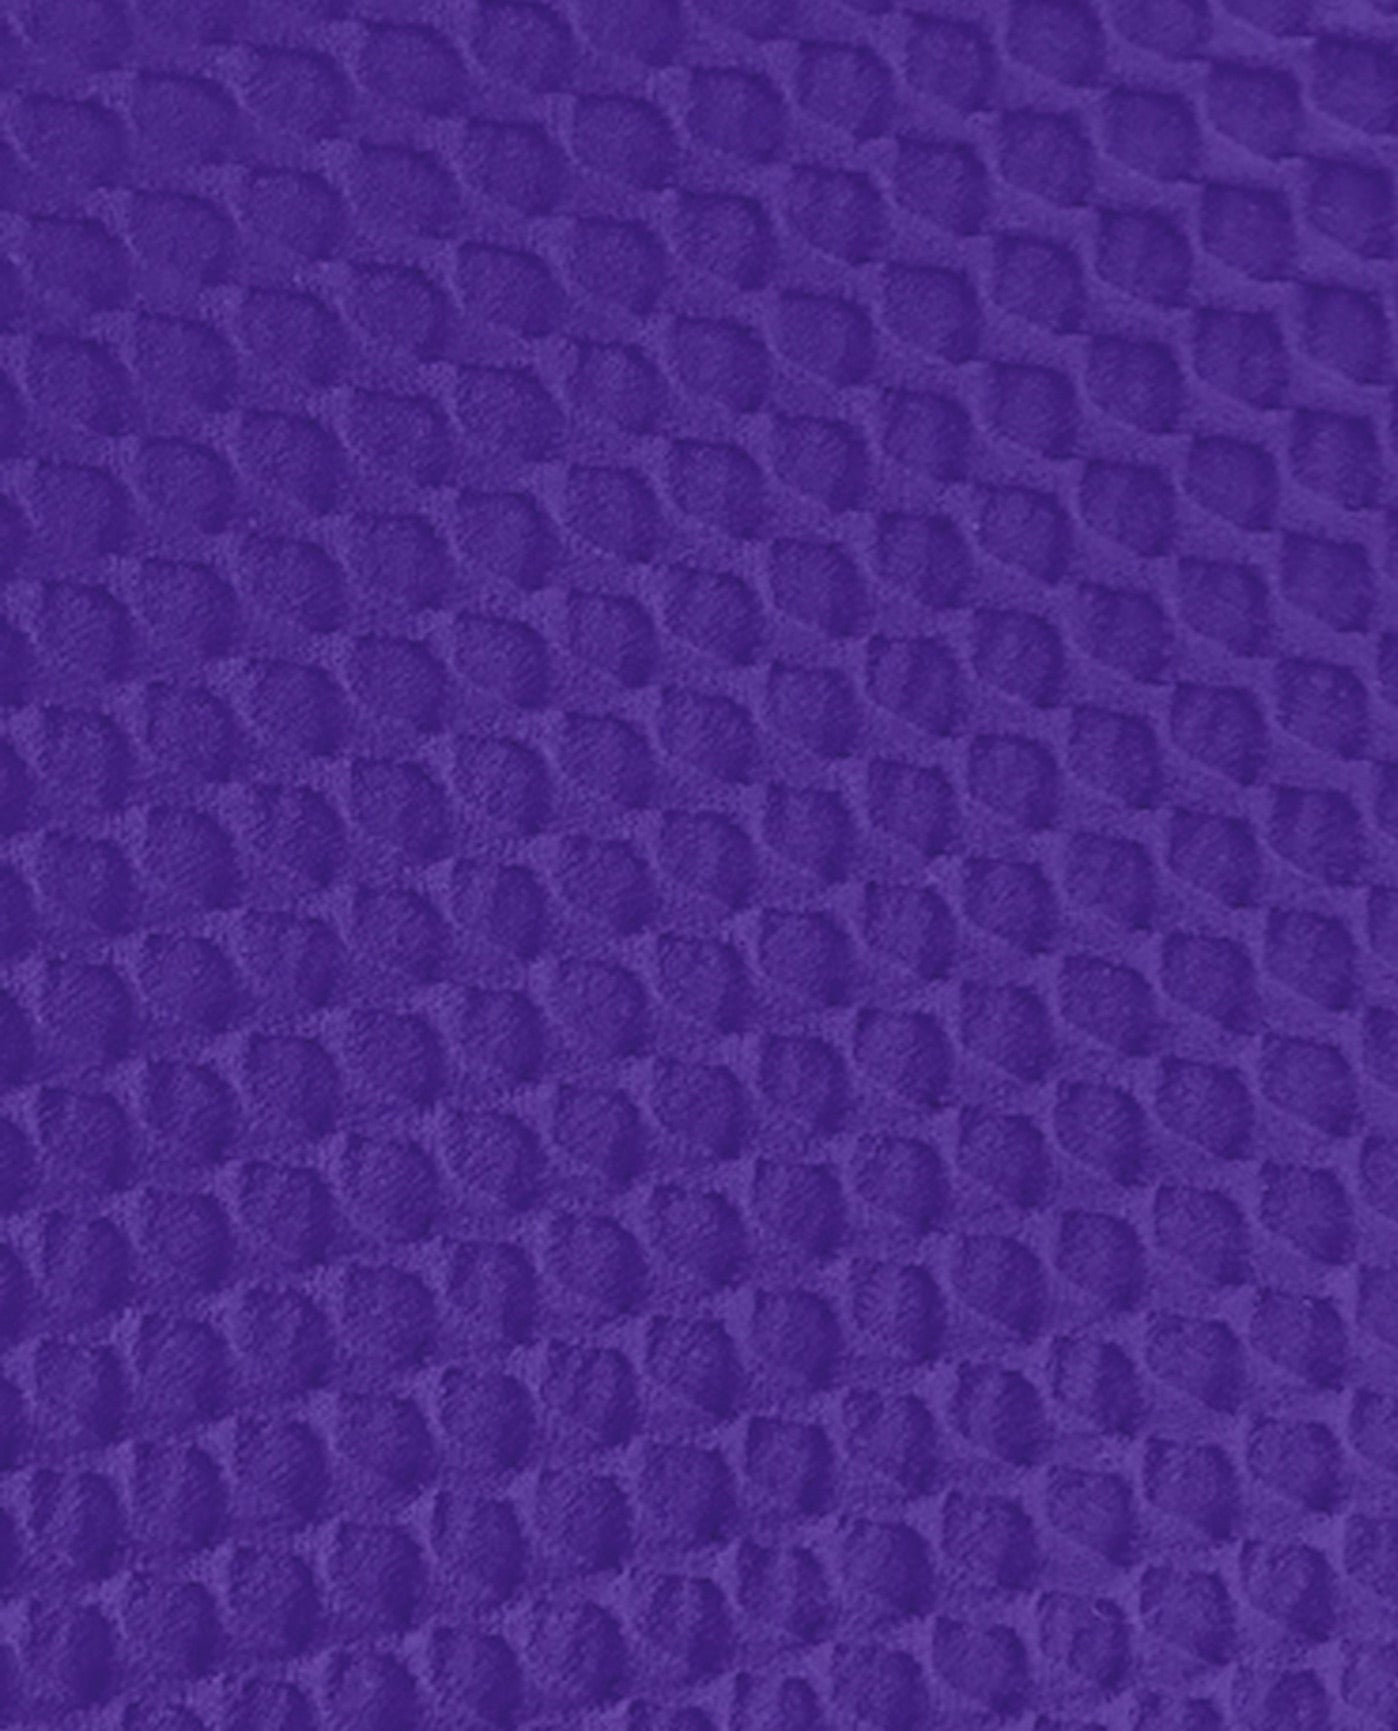 FABRIC SWATCH VIEW OF CHLORINE RESISTANT AQUAMORE SOLID TEXTURED SCOOP NECK ONE PIECE SWIMSUIT | 510 AQT TEXTURED PURPLE